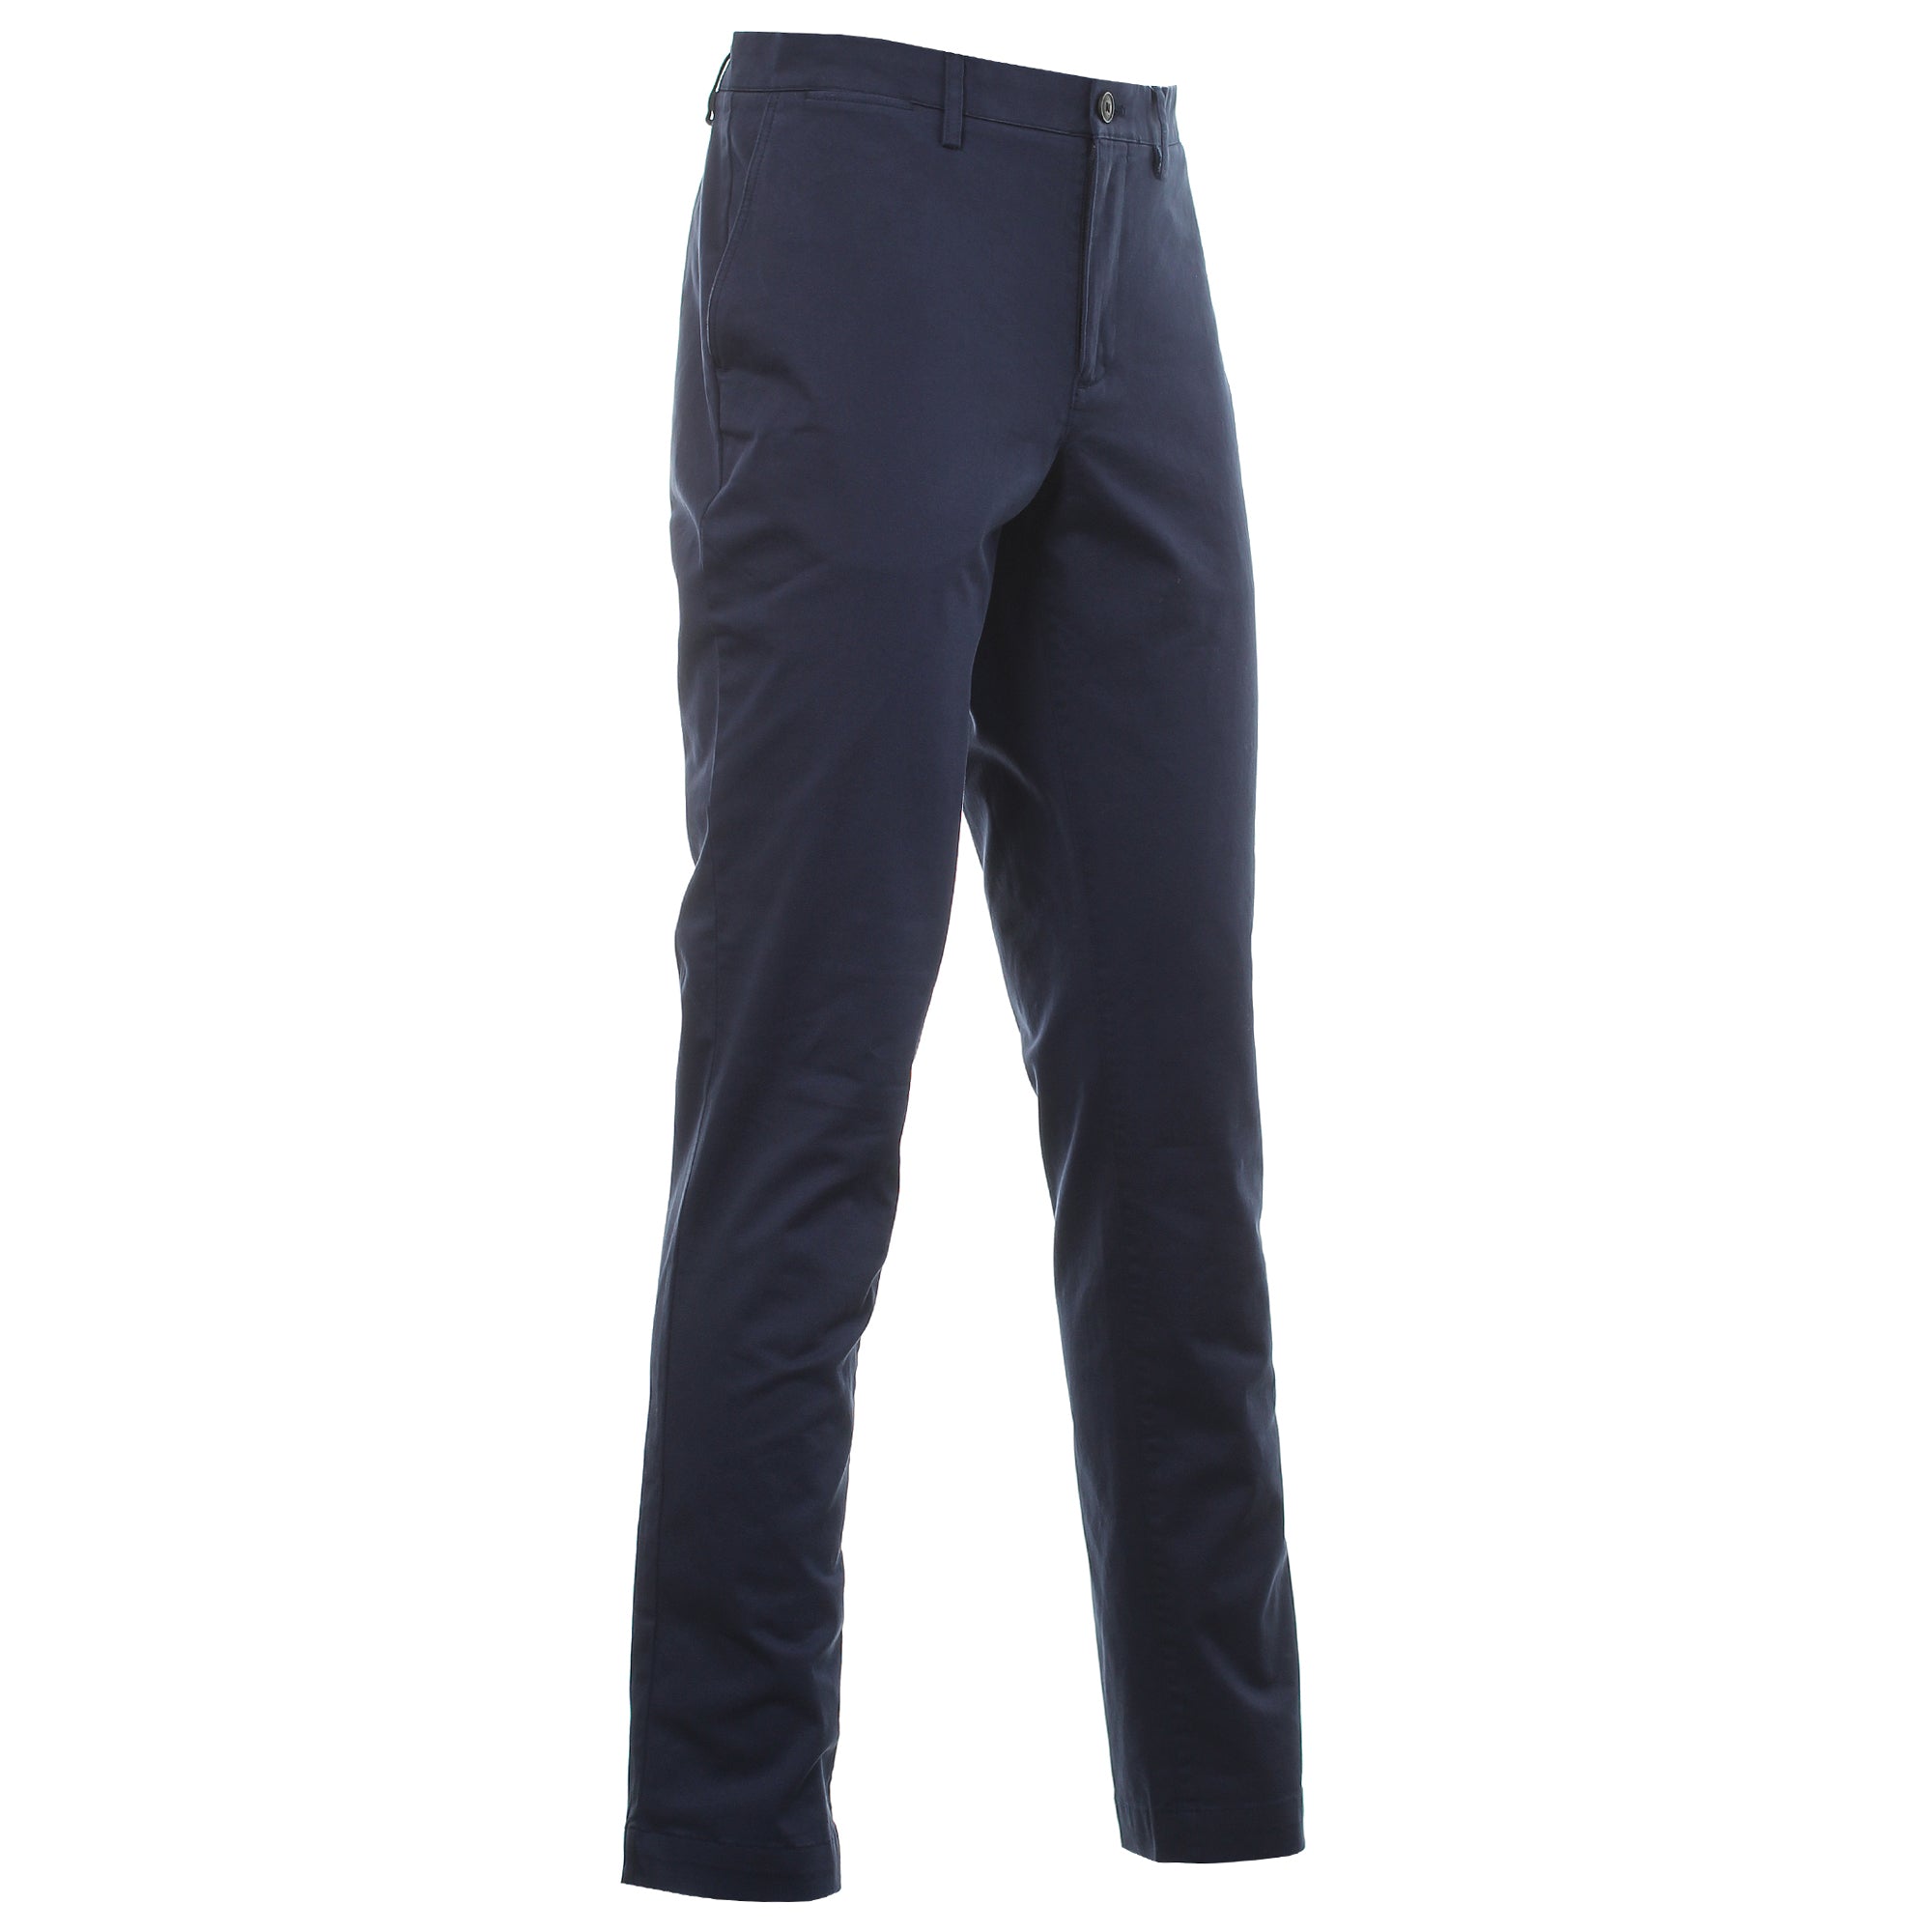 lacoste-stretch-chino-pant-hh9553-cw-navy